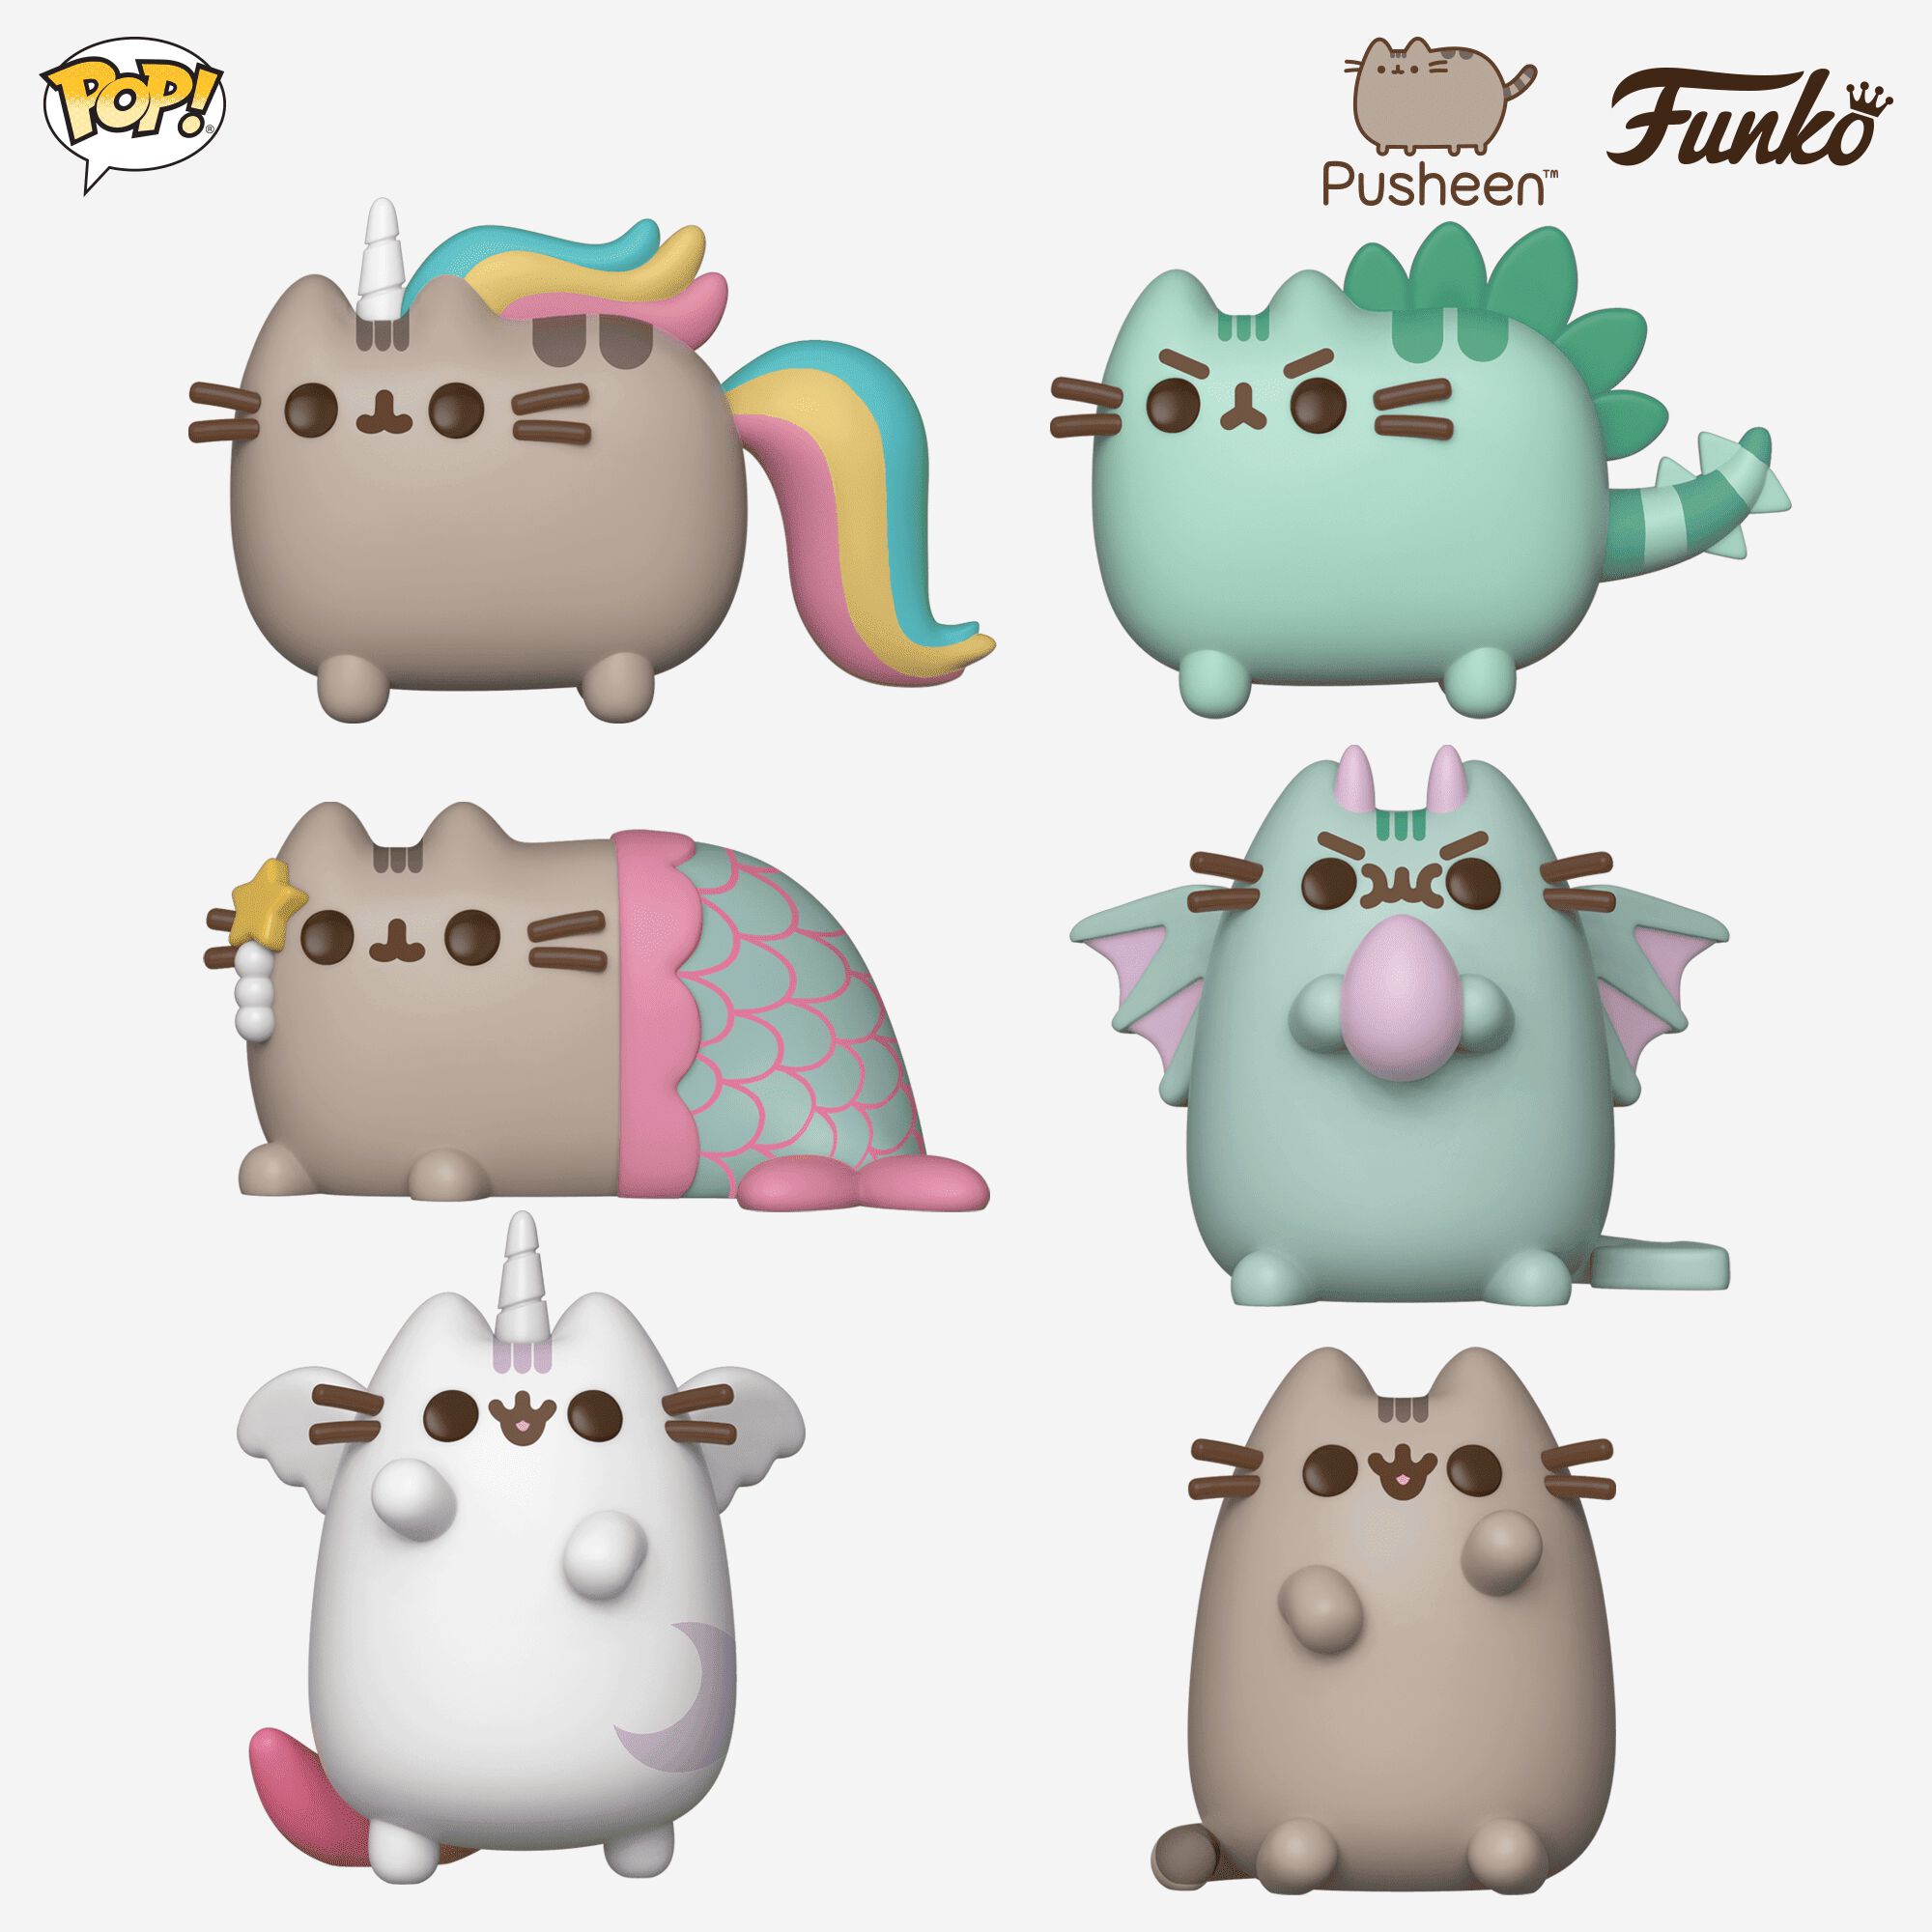 Available now: Pusheen Pop!